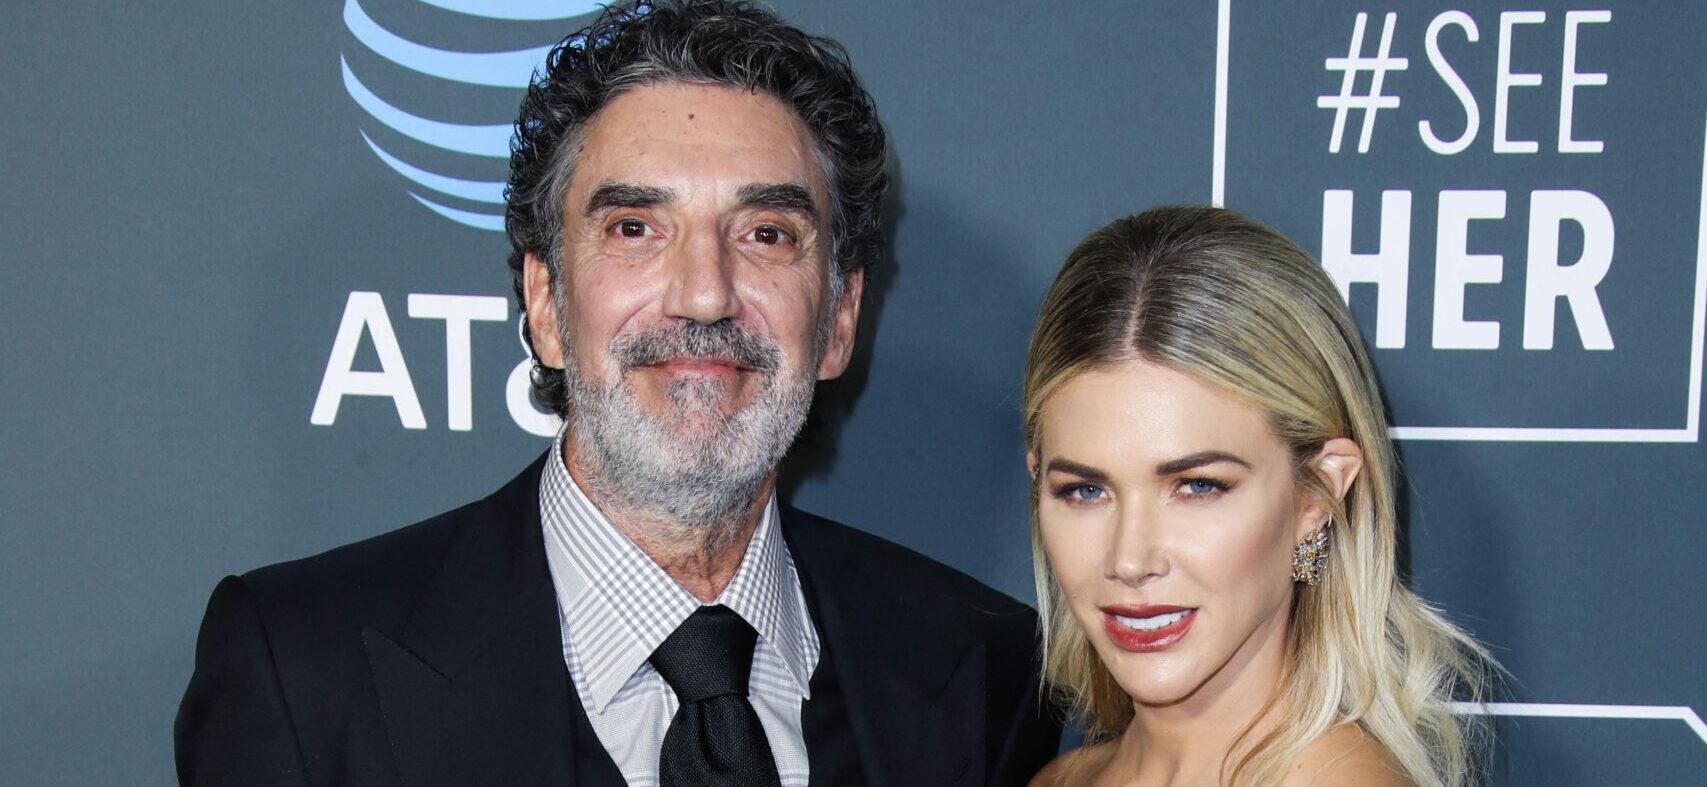 ‘The Big Bang Theory’ Creator Chuck Lorre Paying Ex-Wife $5 Million In Divorce Settlement